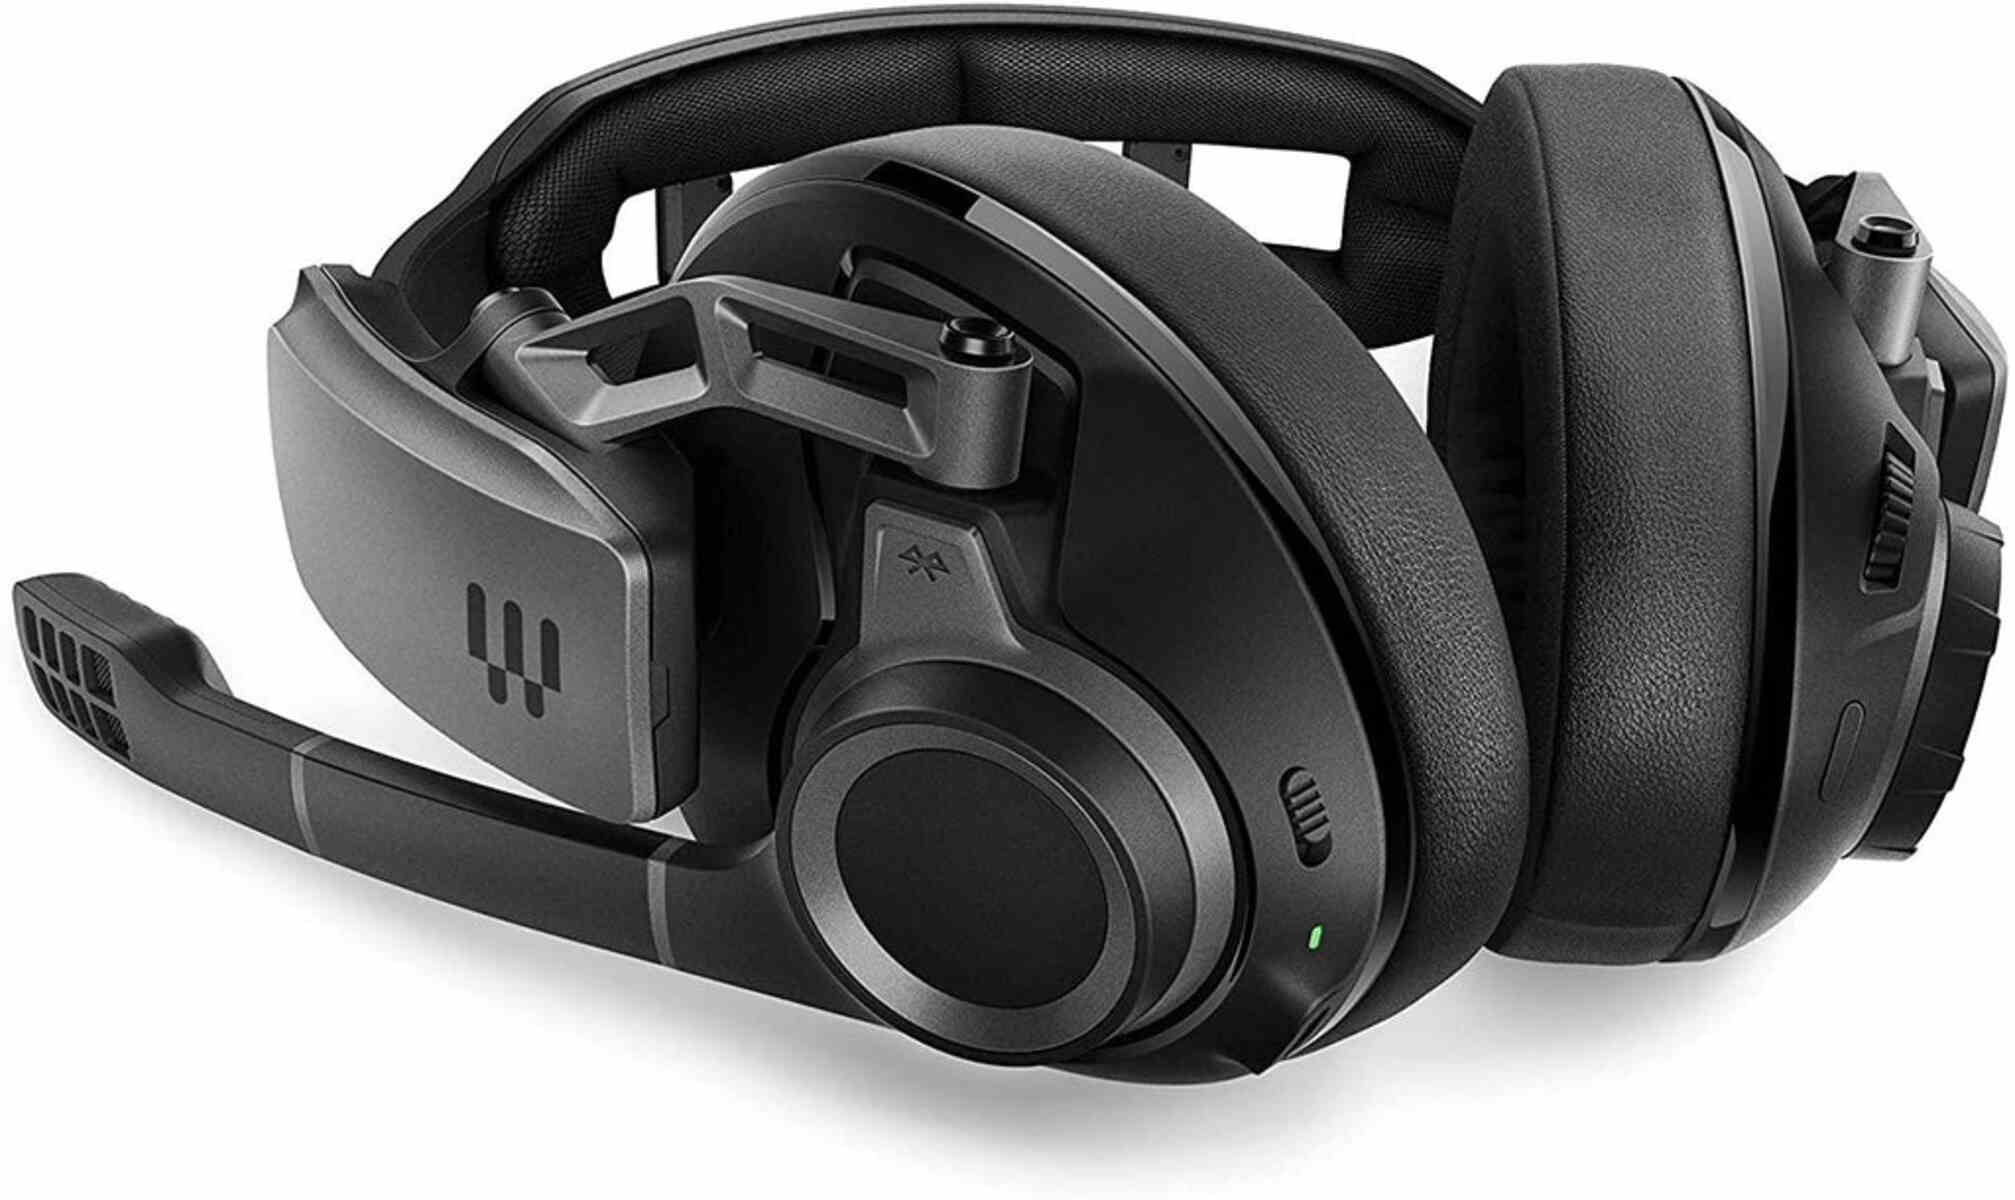 Which Sennheiser Gaming Headset To Buy